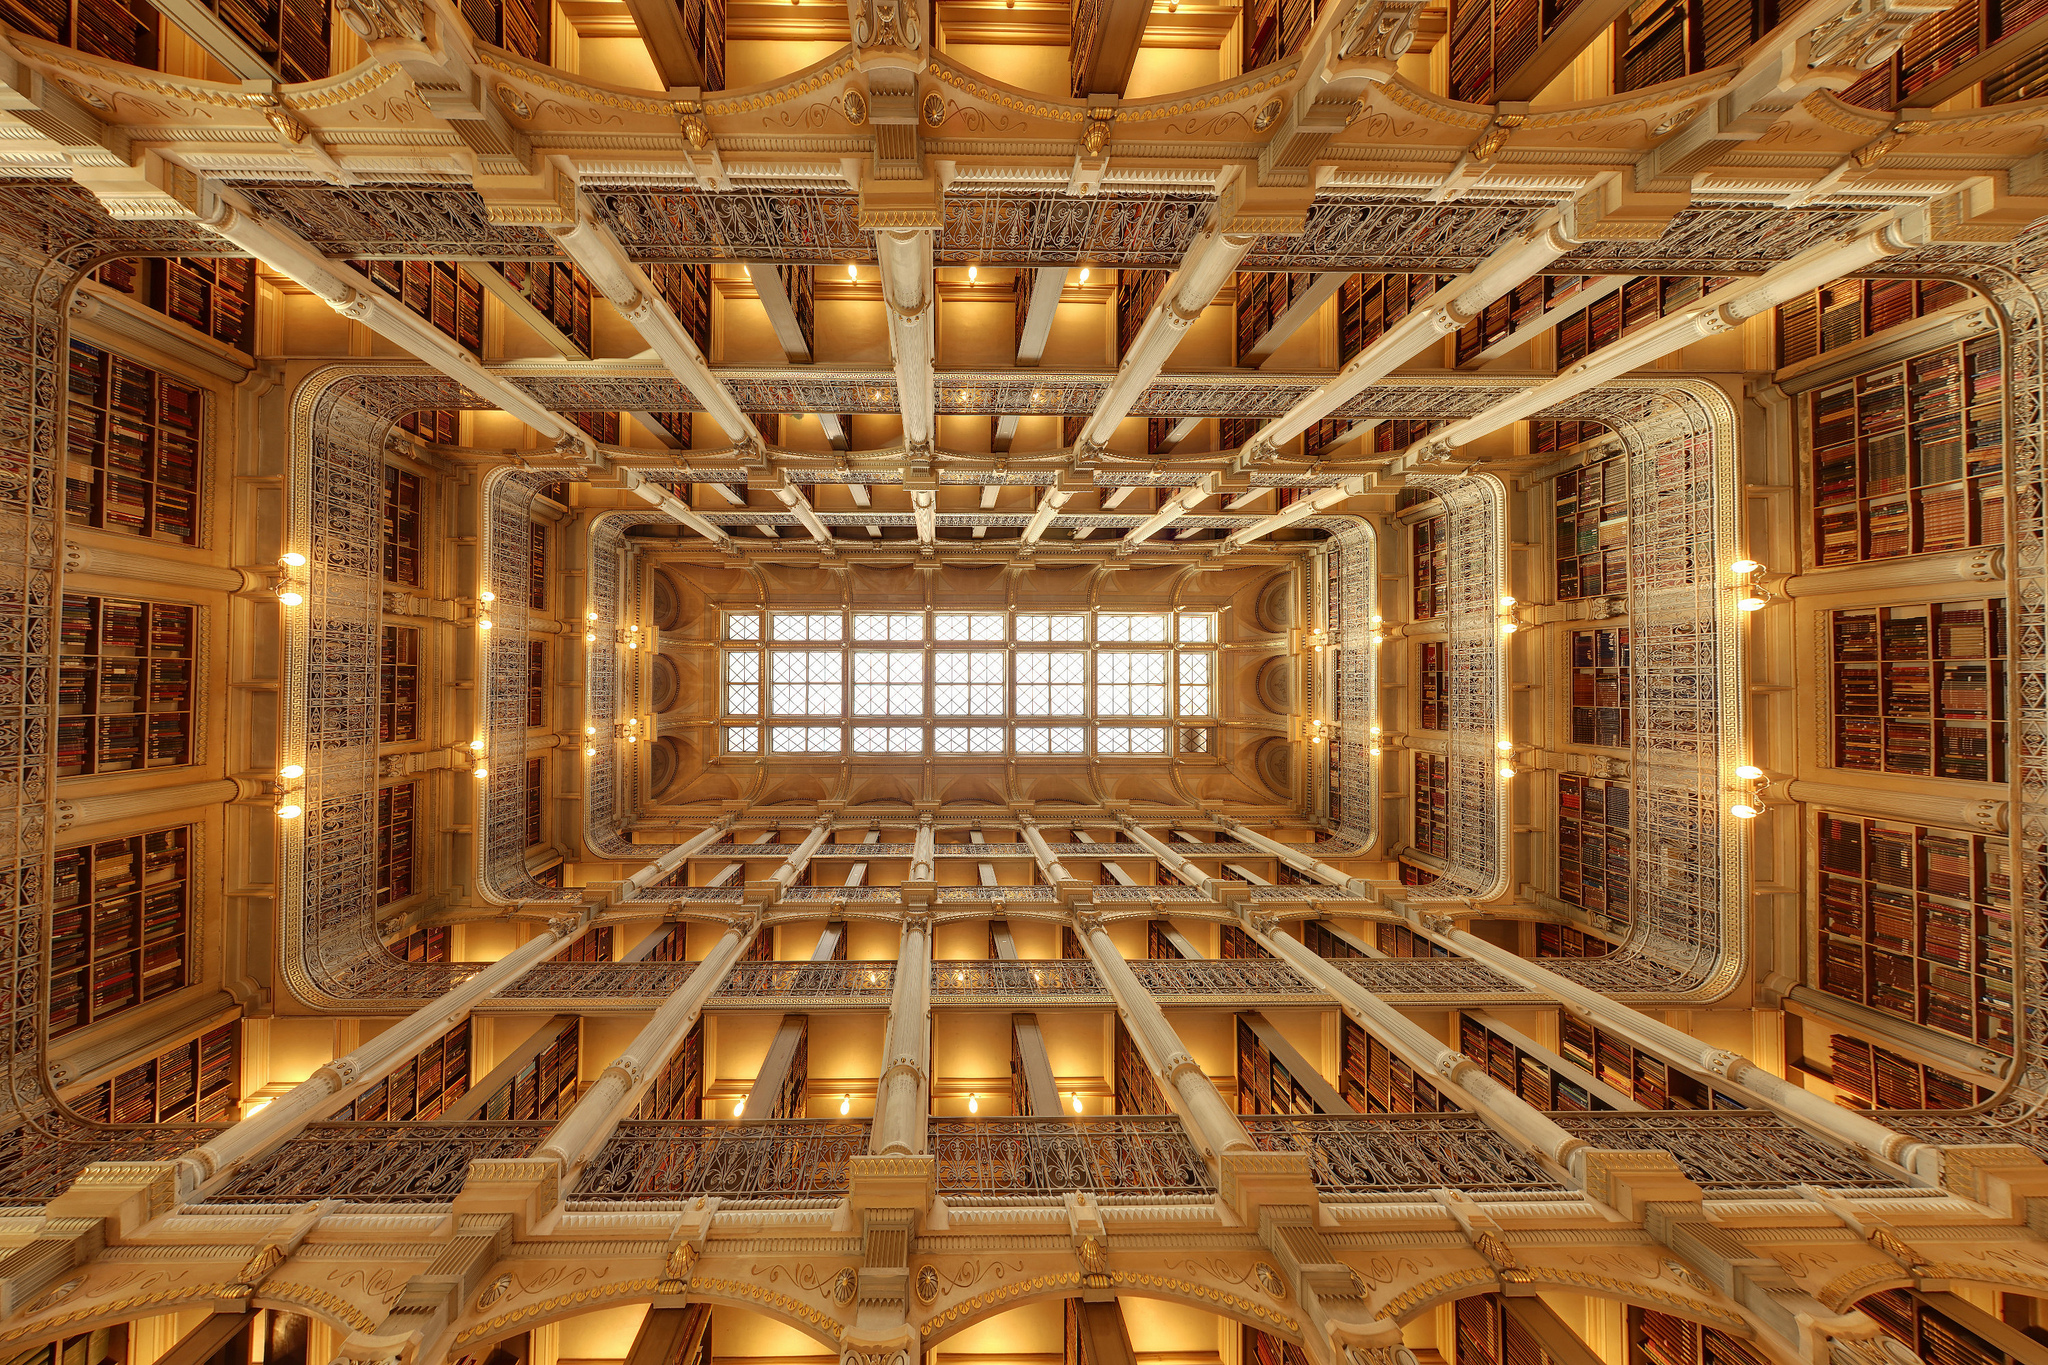 FEATURED LOCATION: The George Peabody Library, Maryland's Mo